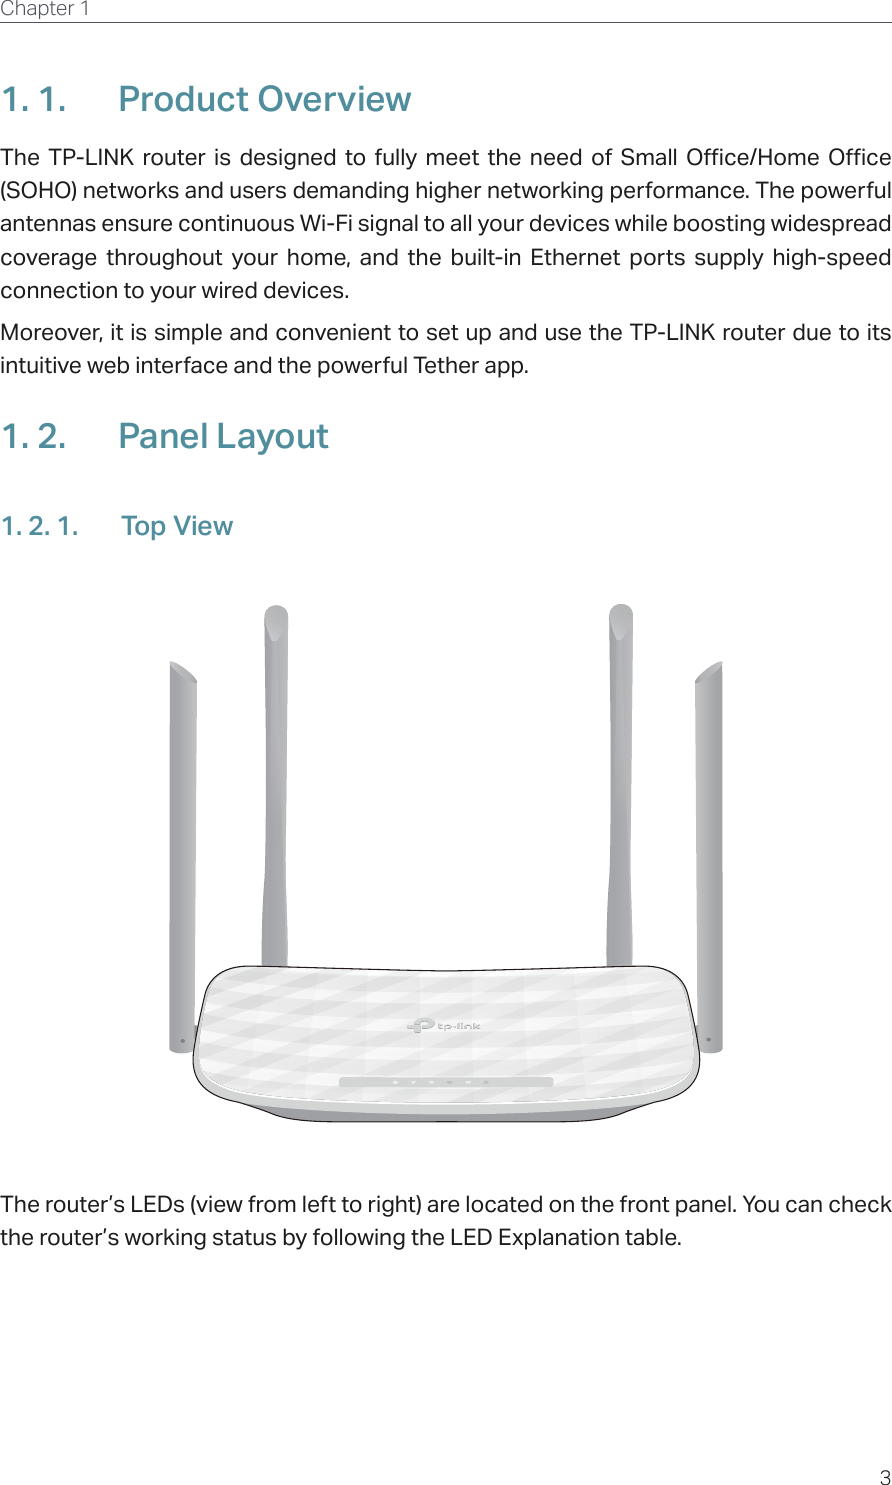 3Chapter 1  1. 1.  Product OverviewThe TP-LINK router is designed to fully meet the need of Small Office/Home Office (SOHO) networks and users demanding higher networking performance. The powerful antennas ensure continuous Wi-Fi signal to all your devices while boosting widespread coverage throughout your home, and the built-in Ethernet ports supply high-speed connection to your wired devices.Moreover, it is simple and convenient to set up and use the TP-LINK router due to its intuitive web interface and the powerful Tether app.1. 2.  Panel Layout1. 2. 1.  Top ViewThe router’s LEDs (view from left to right) are located on the front panel. You can check the router’s working status by following the LED Explanation table.